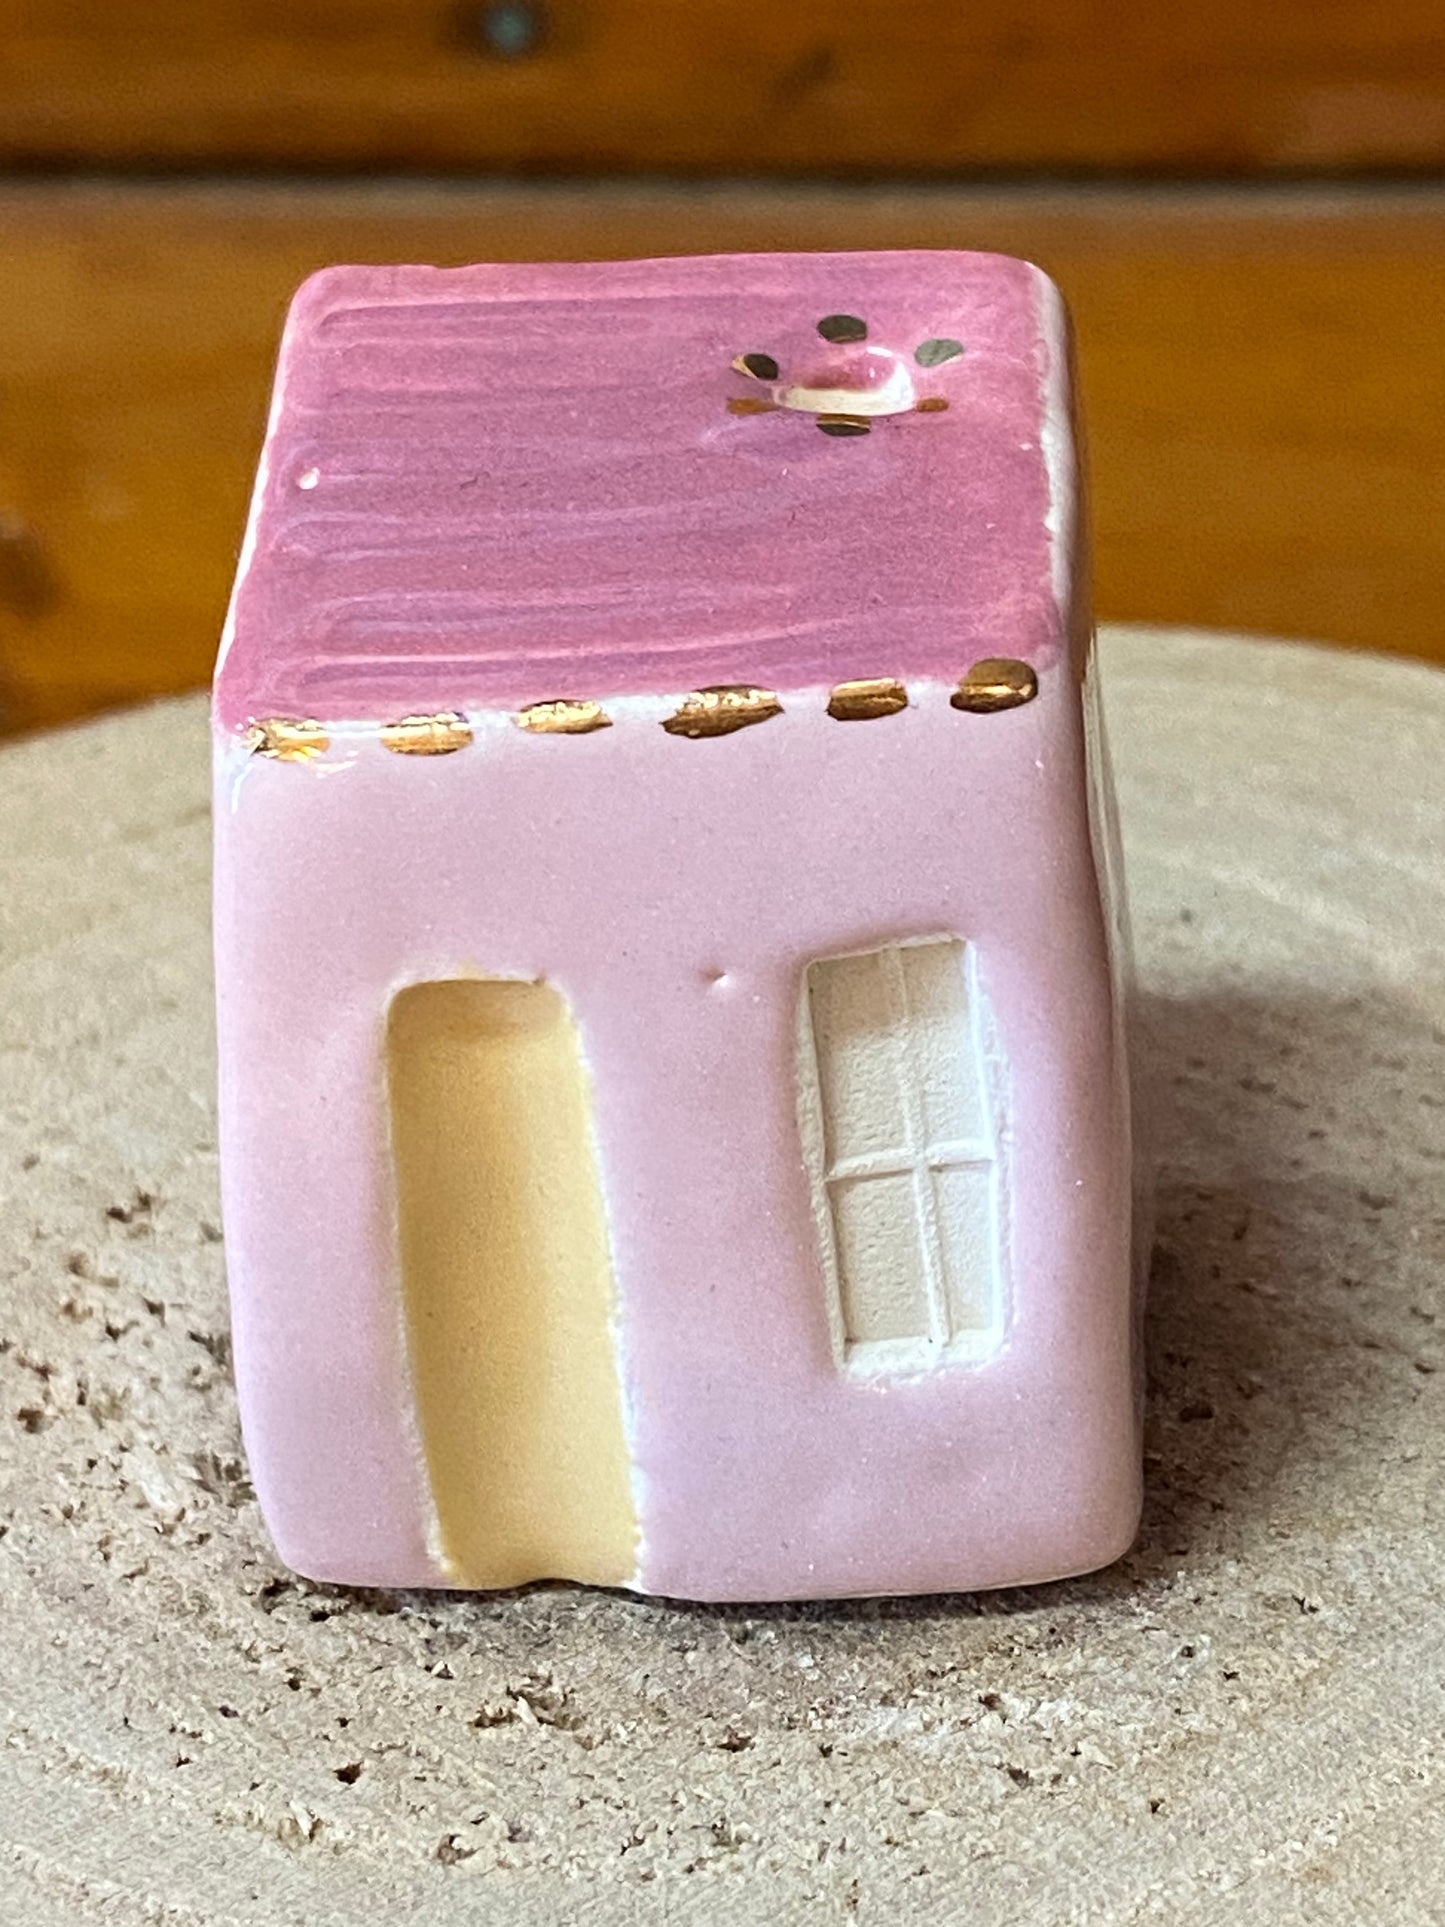 Funky Pickle ceramic houses Eclectopia Gifts and Specialty Homewares 